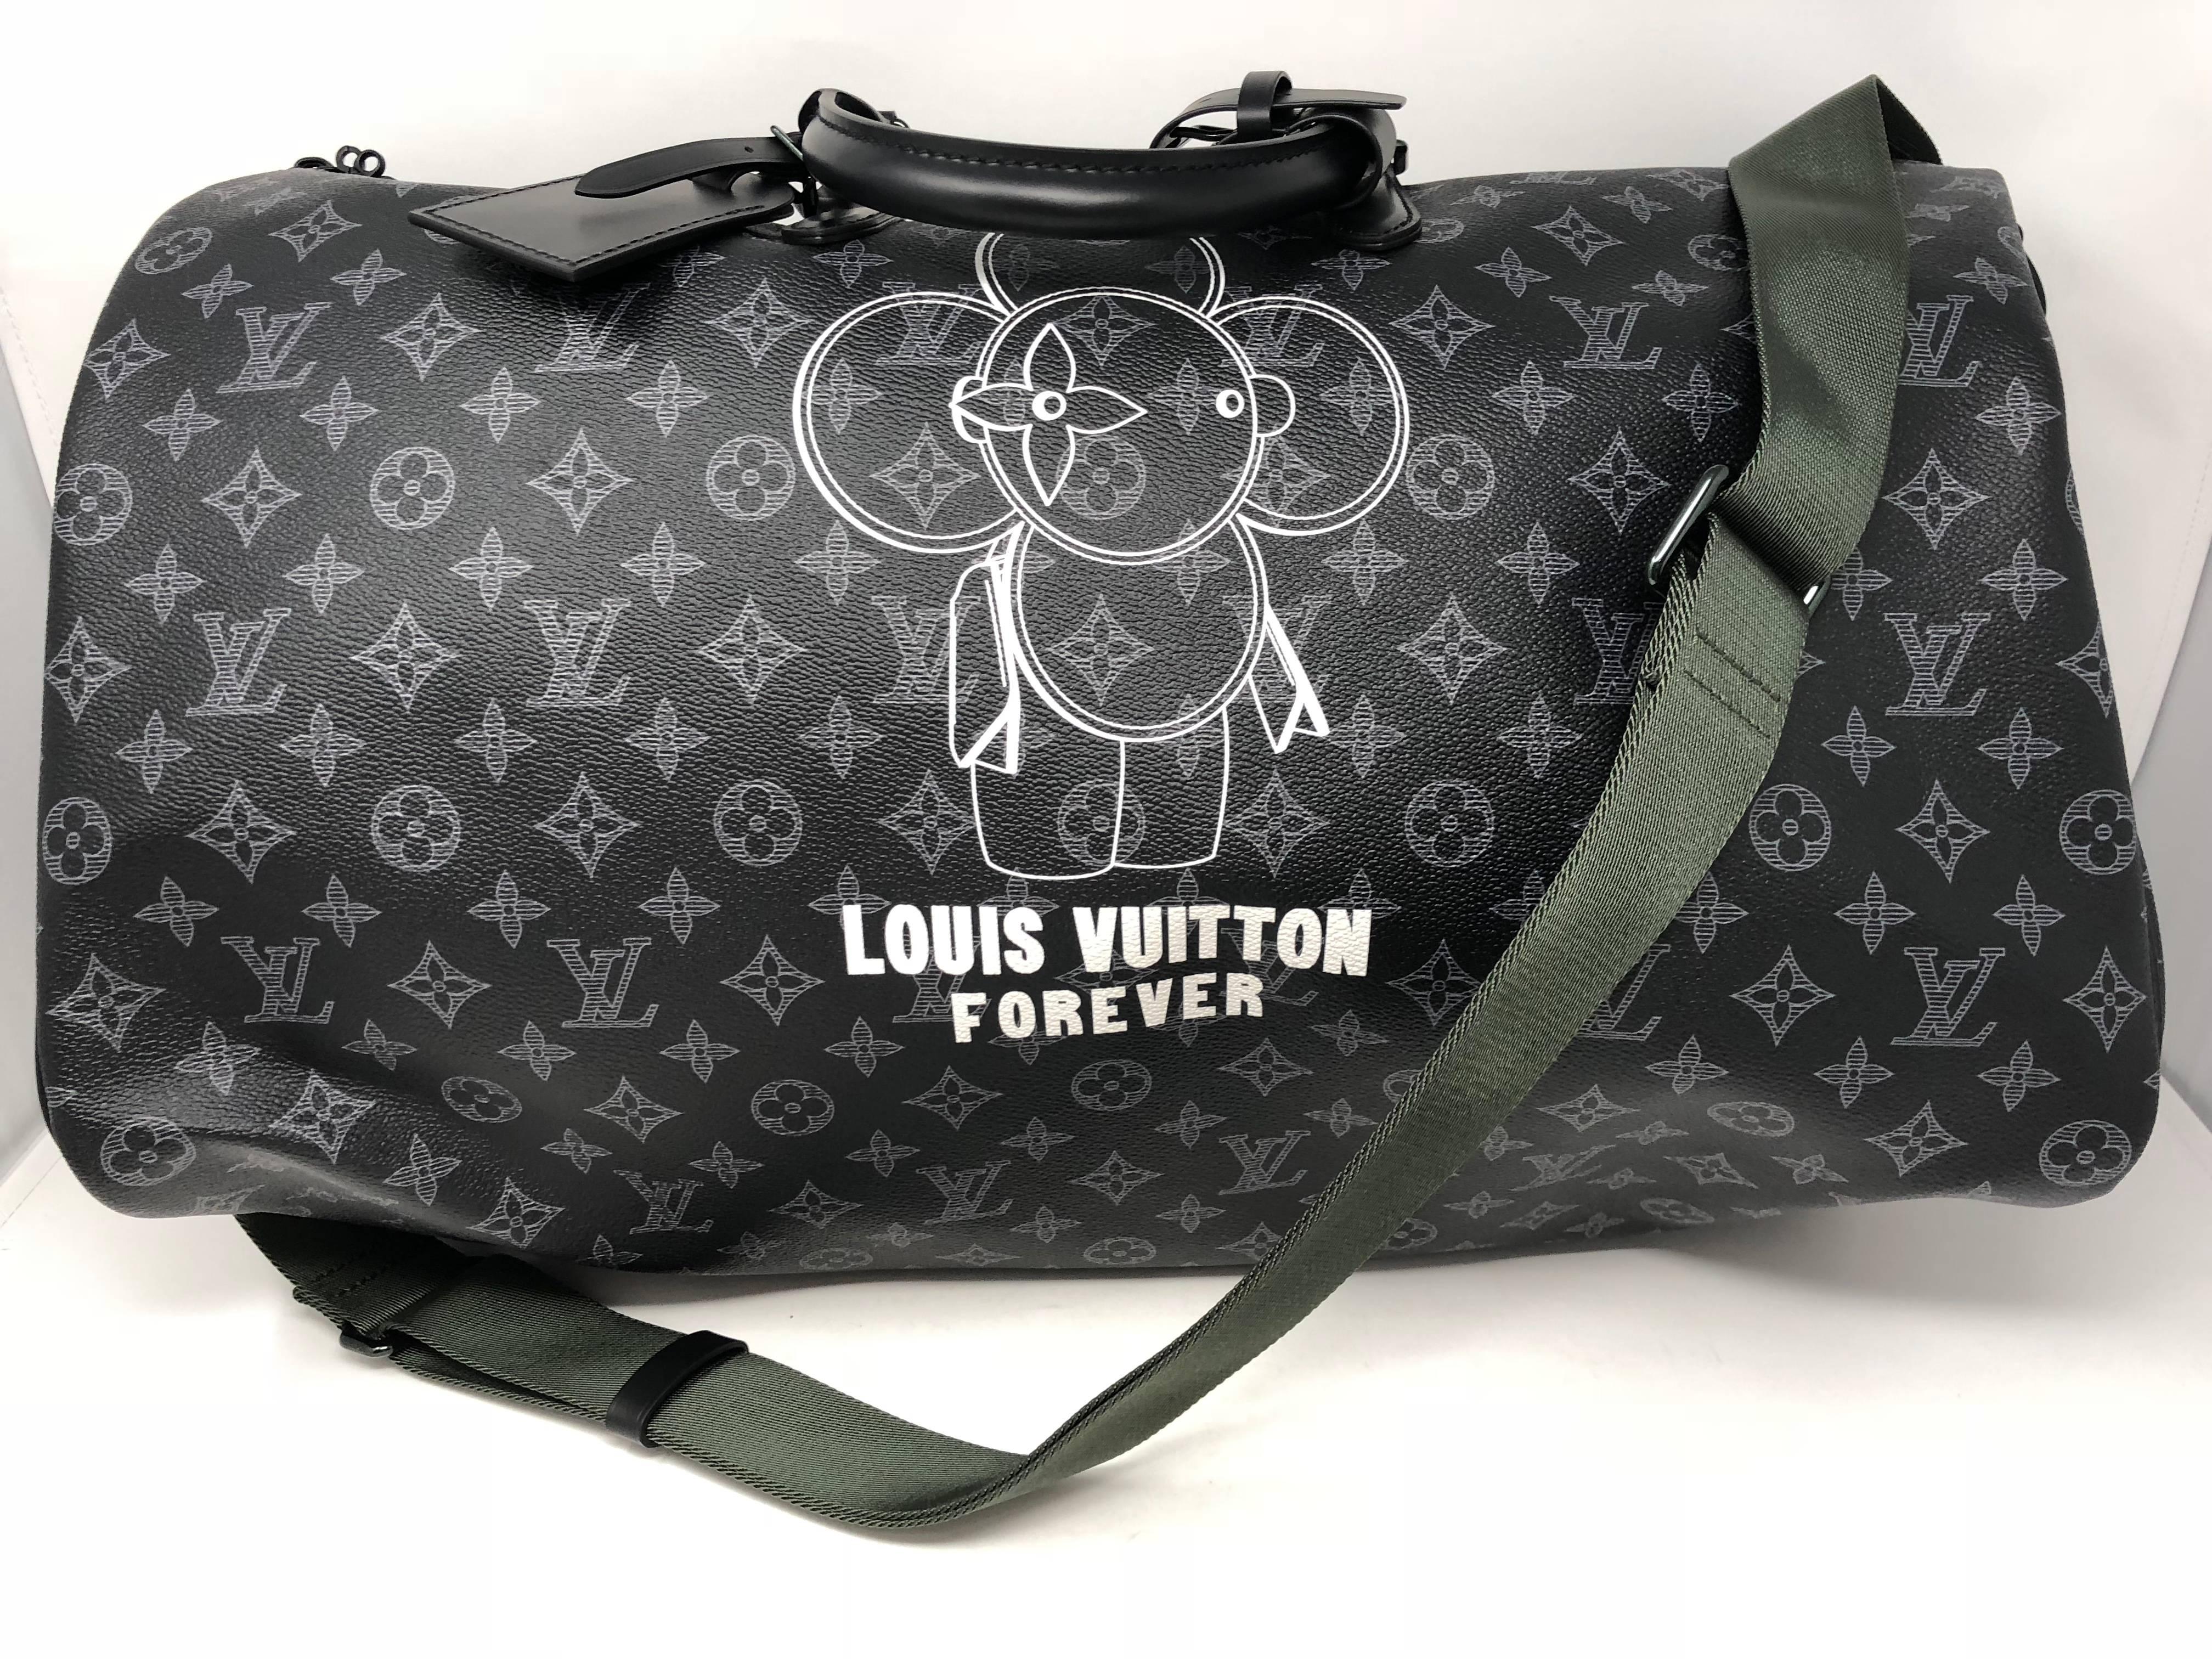 Louis Vuitton Monogram Eclipse Vivienne Keepall Bandouliere 50 with removable and adjustable strap. Louis Vuitton's Vivienne mascot is featured on the bag from the Pre-collection Fall-Winter 2018 line. Sold exclusively in Pop up locations and not